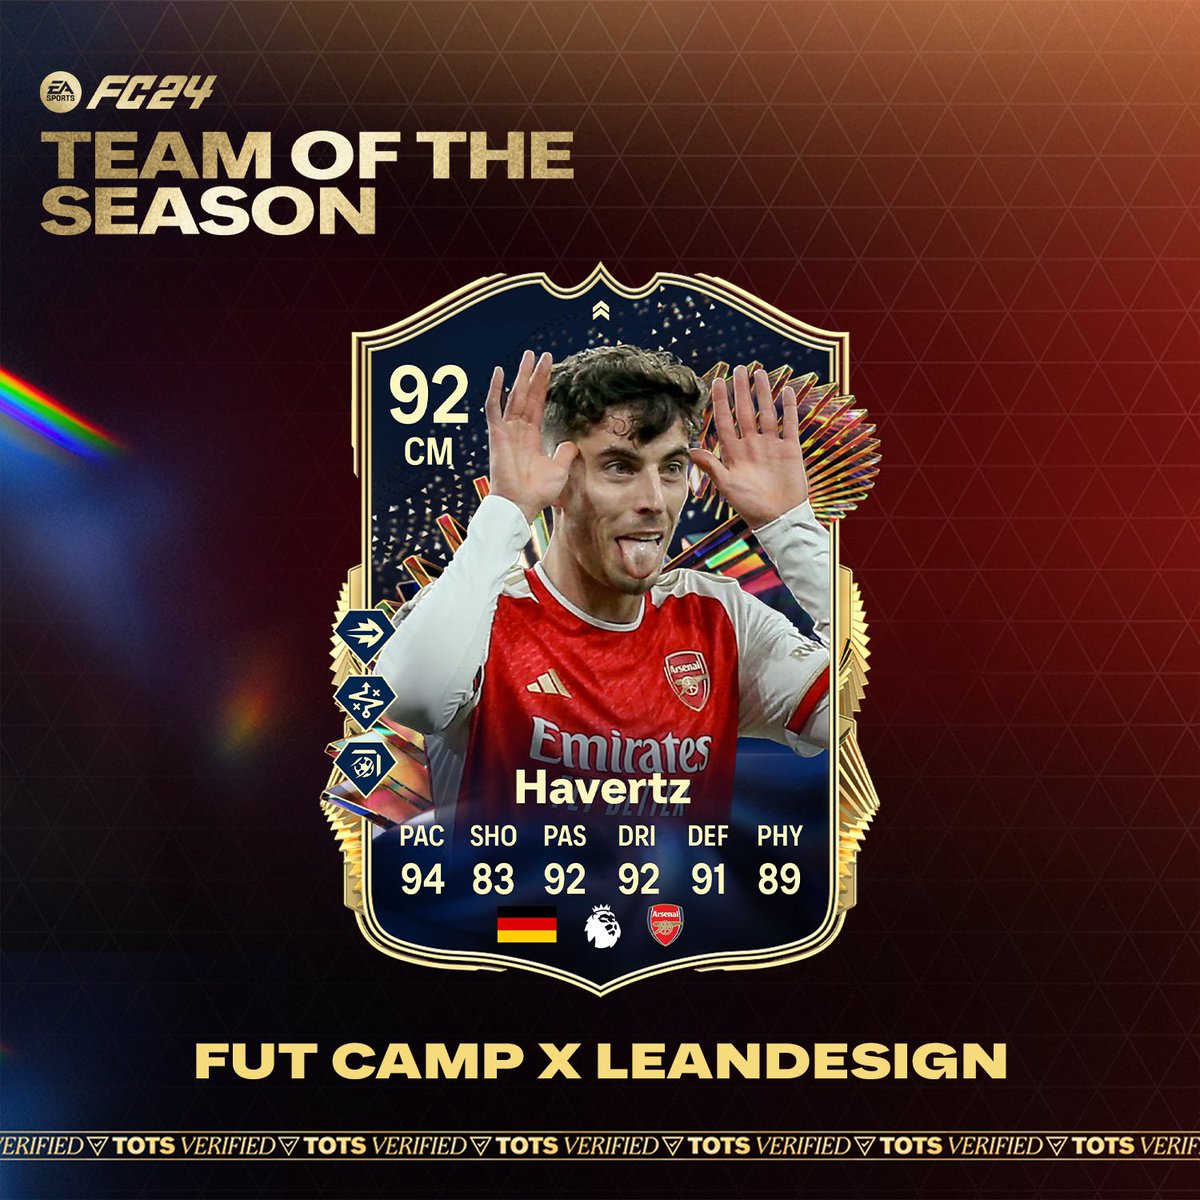 Kai Havertz’s leaked @EASPORTSFC Team of the Season Live card on #FC24 Ultimate Team to be released today. 🤯🎮 [@fut_camp] #afc